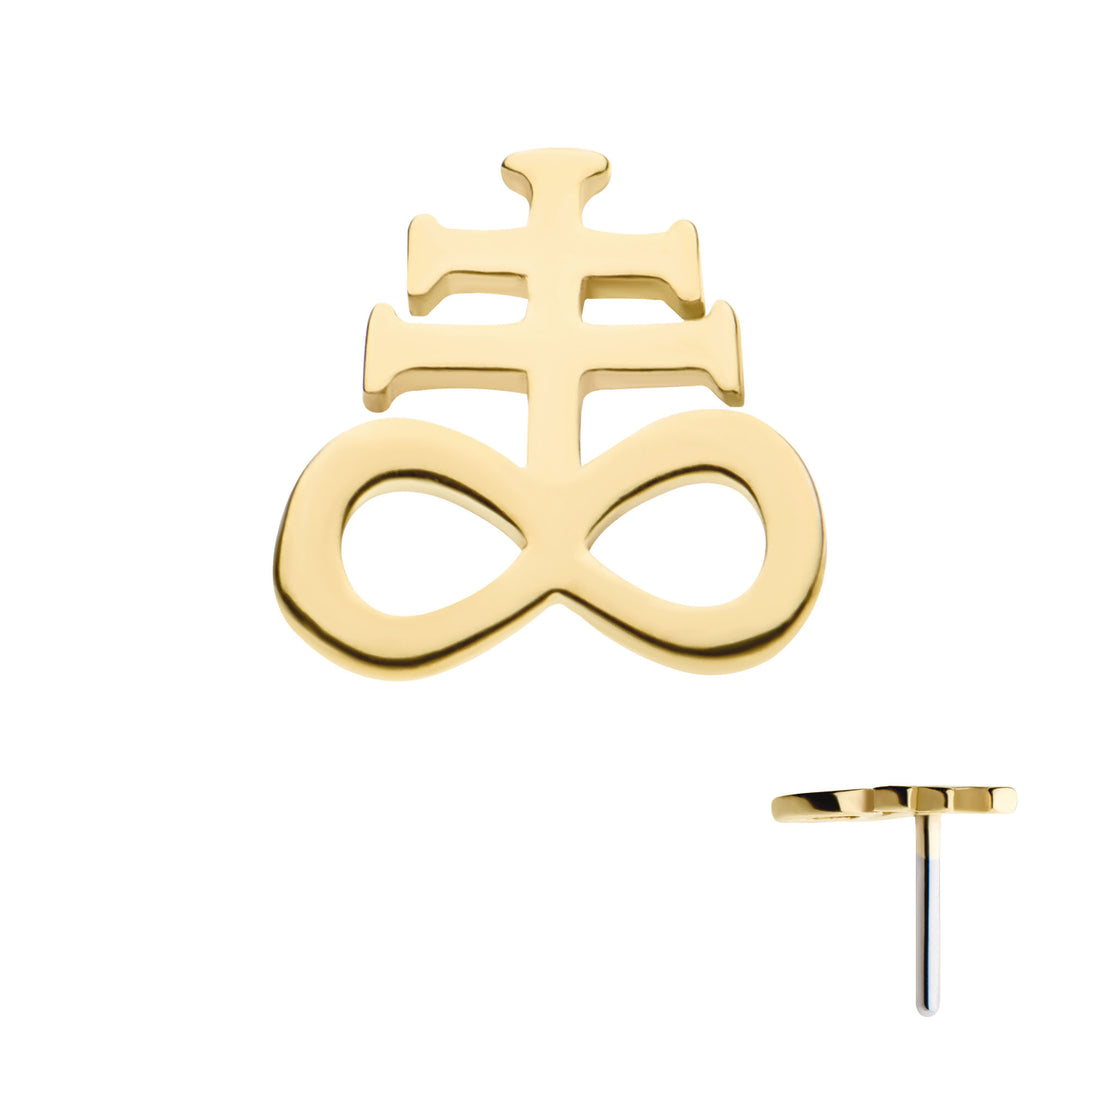 14Kt Gold Threadless with Leviathan Cross Top